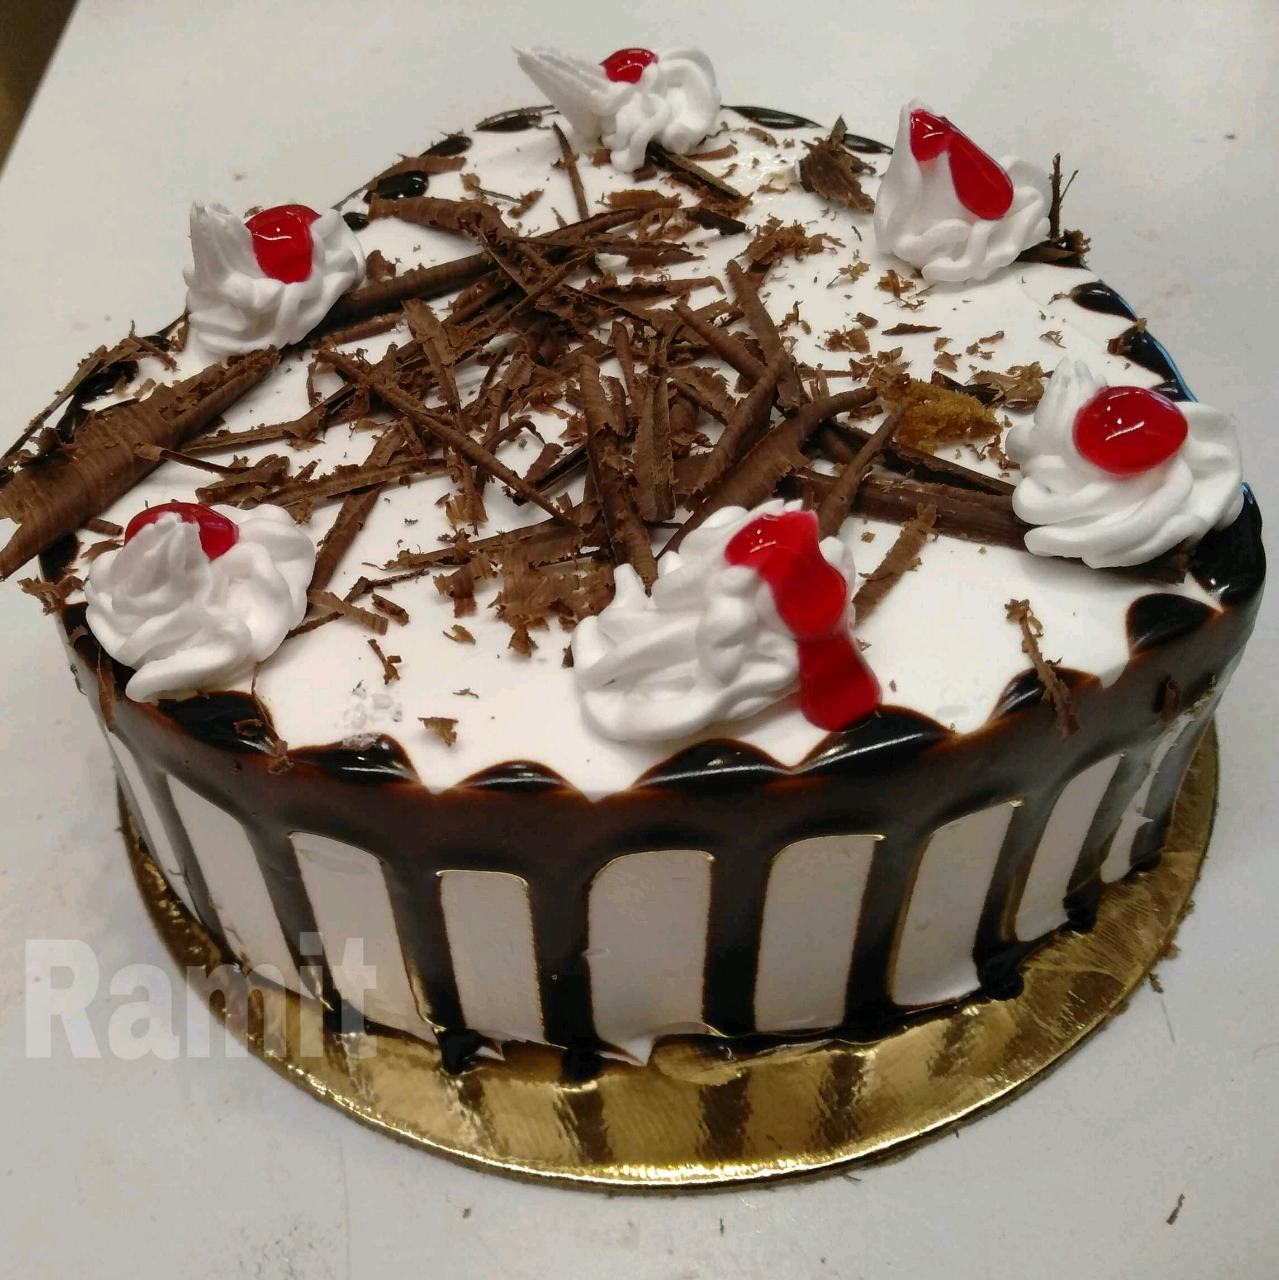  Eggless BlackForest (Heart Shaped Cake Without Sides Comb, Go Through The Picture)